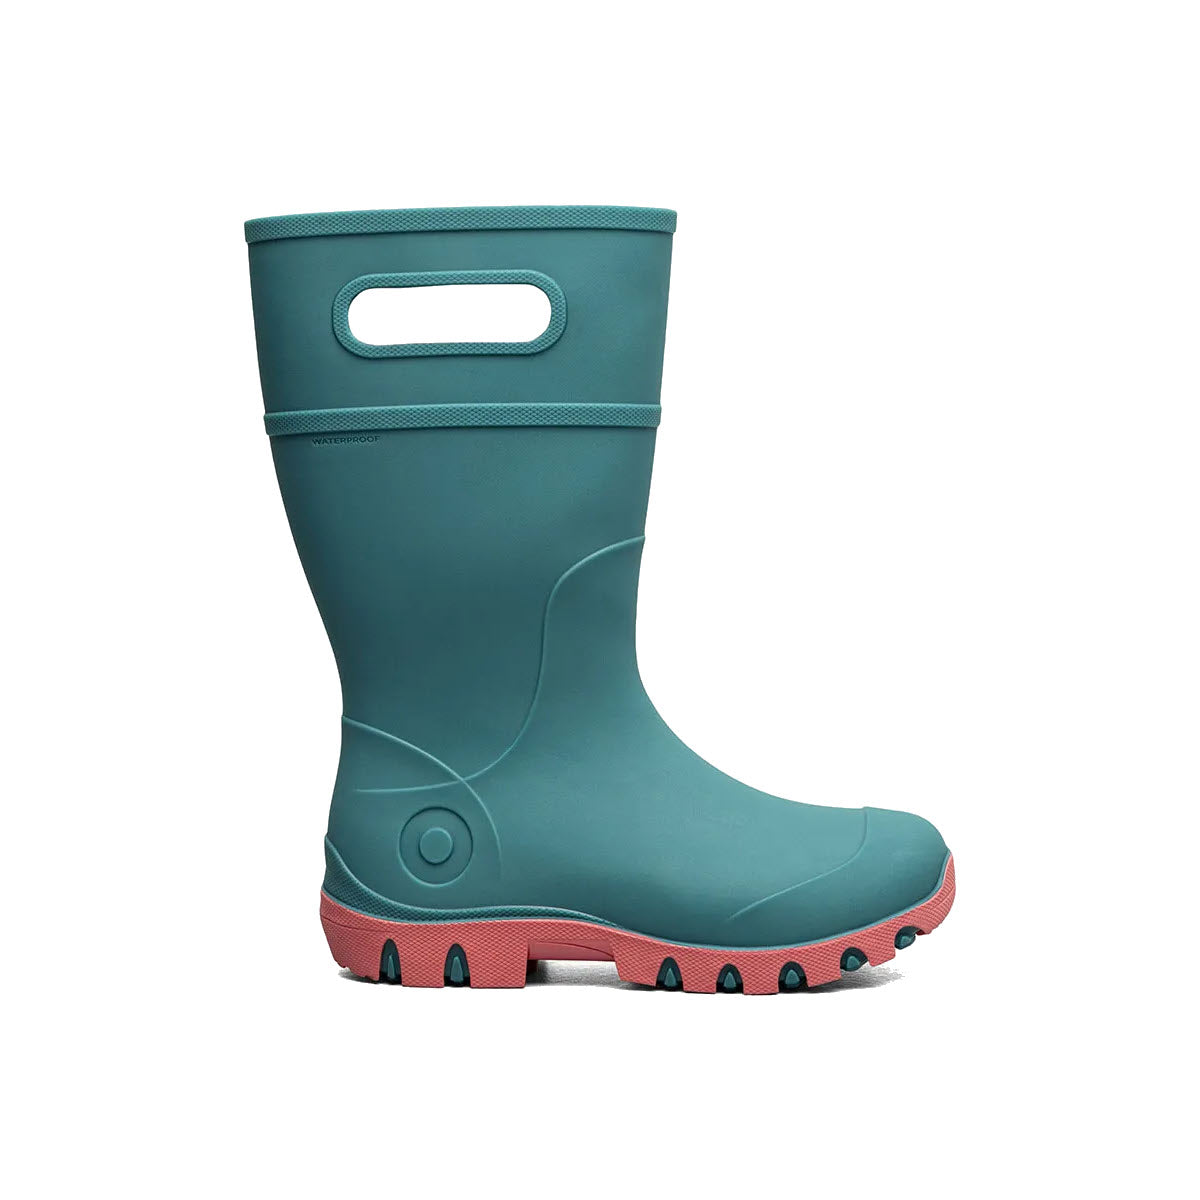 A Bogs teal rubber boot with a red sole and a handle built into the upper part, designed for easy wearing, features seamless construction, isolated on a white background.